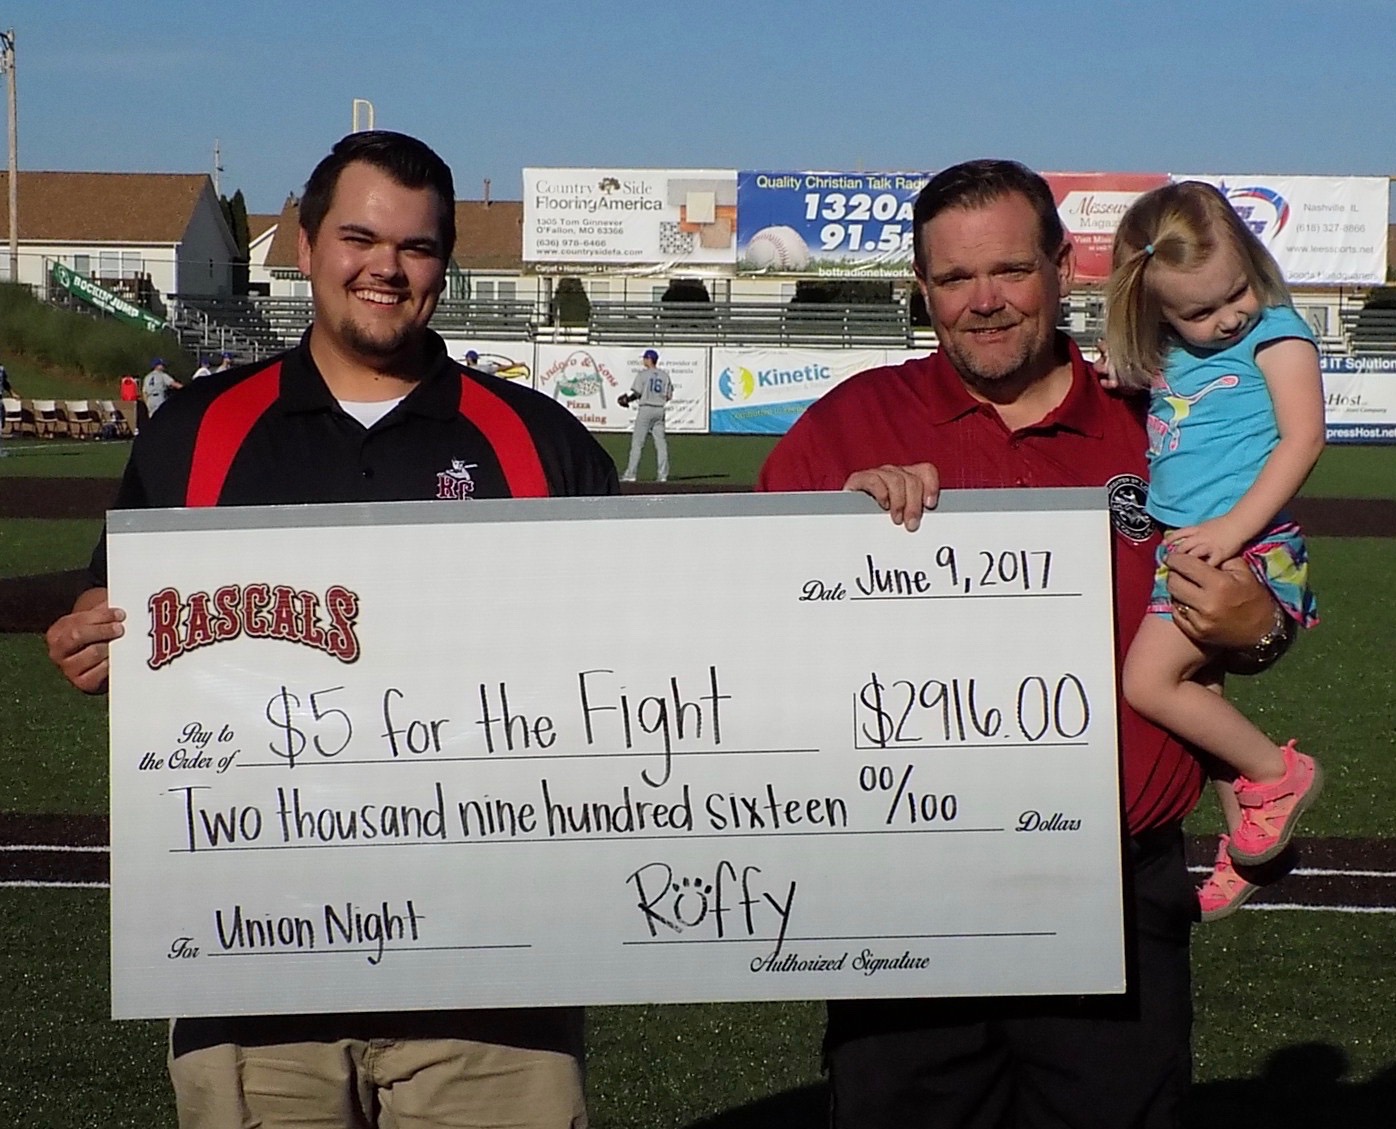 2,916 raised for Fight Fund at River City Rascals fundraiser The